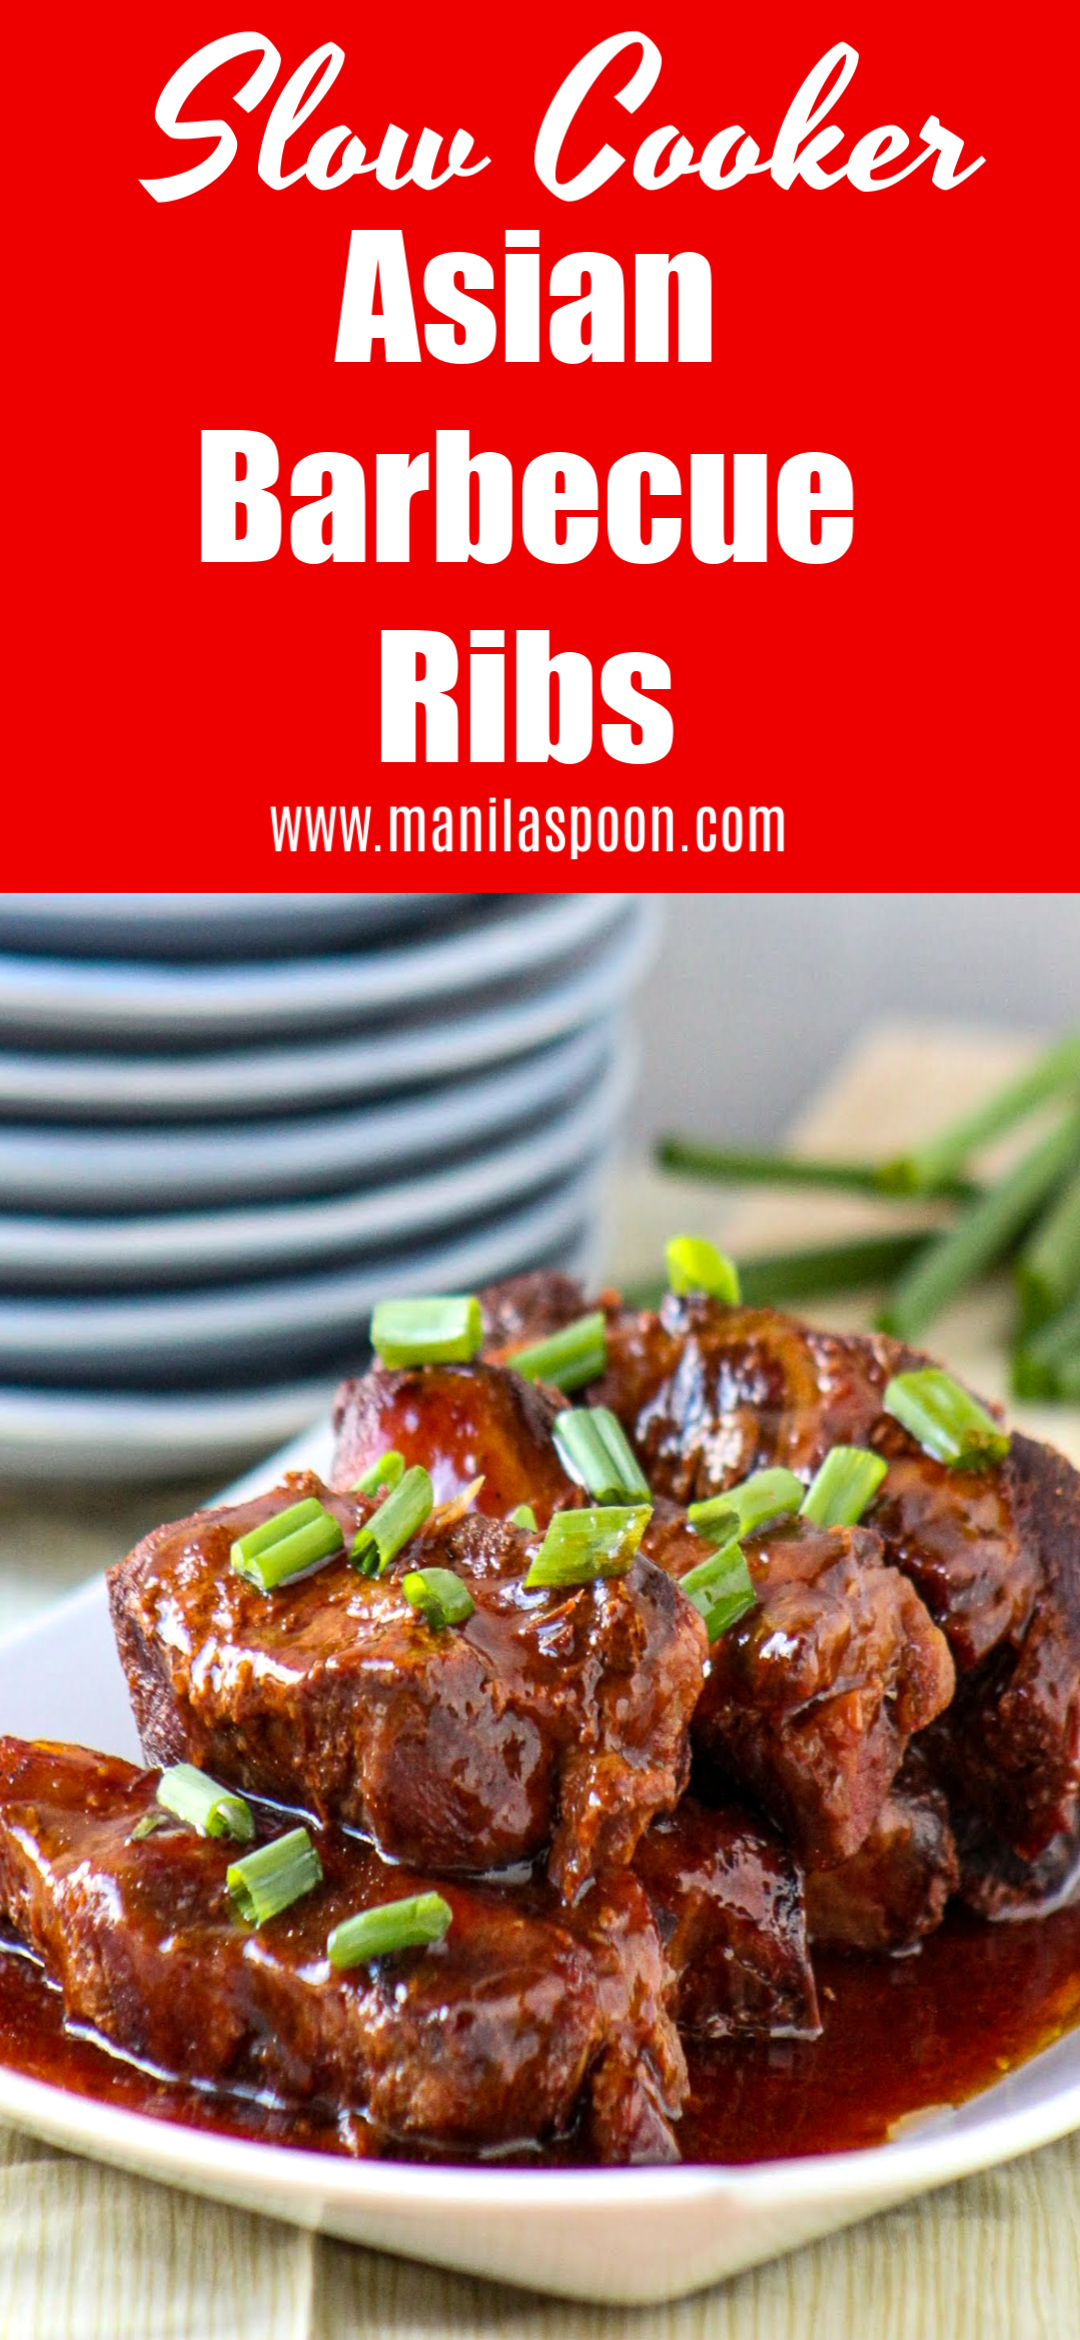 Slow Cooker Asian Barbecue Ribs